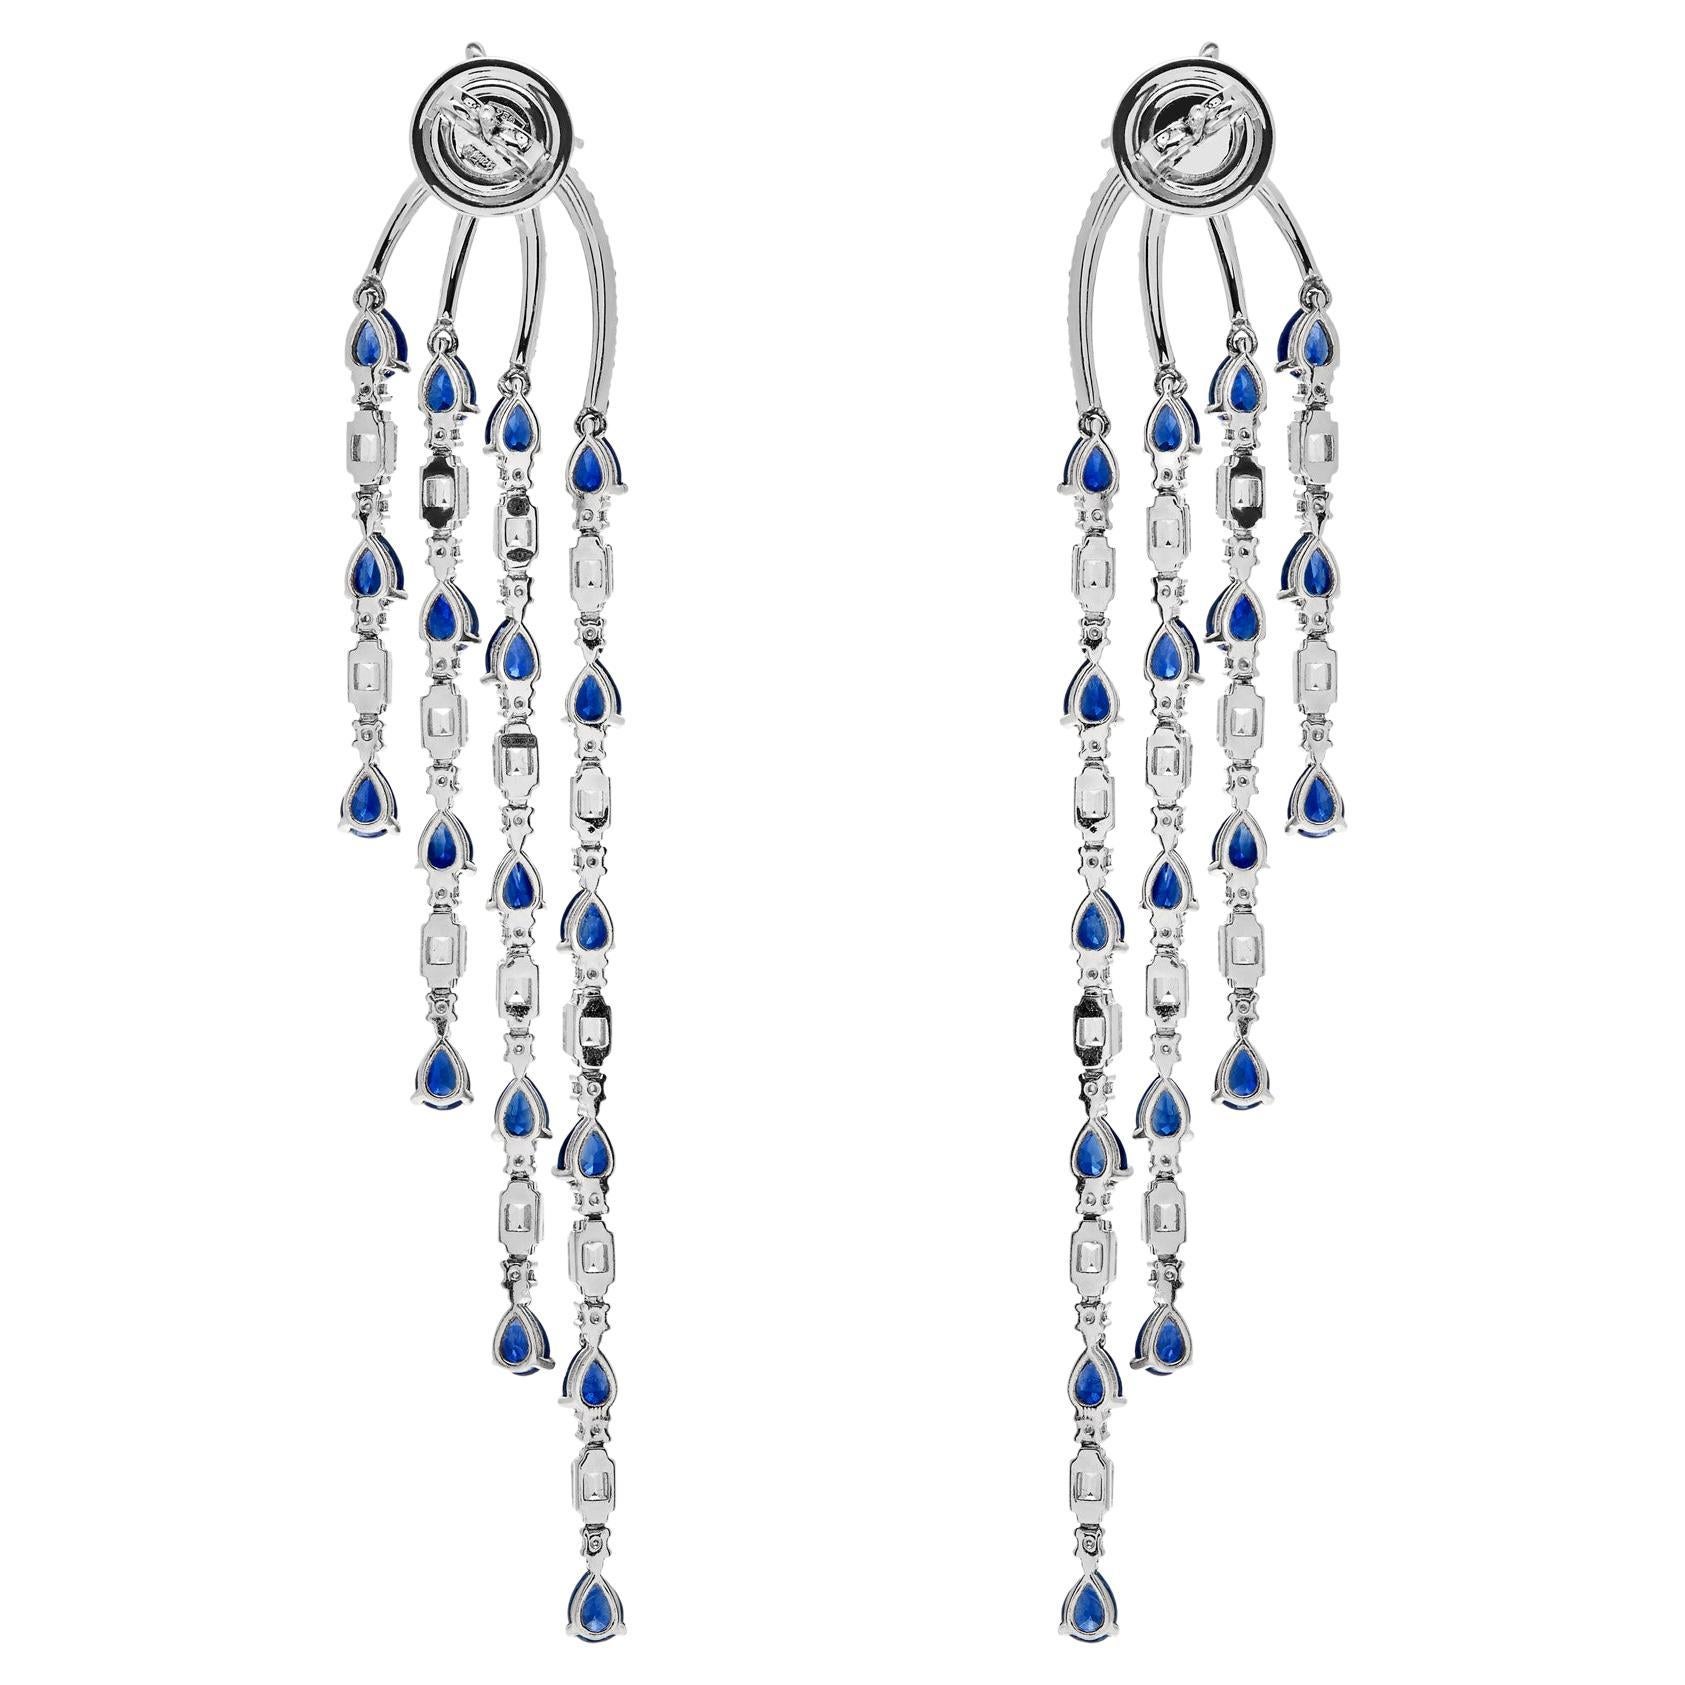 Elevate your ensemble with these stunning Diamond & Blue Sapphire Chandelier Earrings. With a weight of 18.59 grams of 18-karat white gold, these earrings offer both style and comfort. The dazzling combination of 5.10 carats of emerald and round